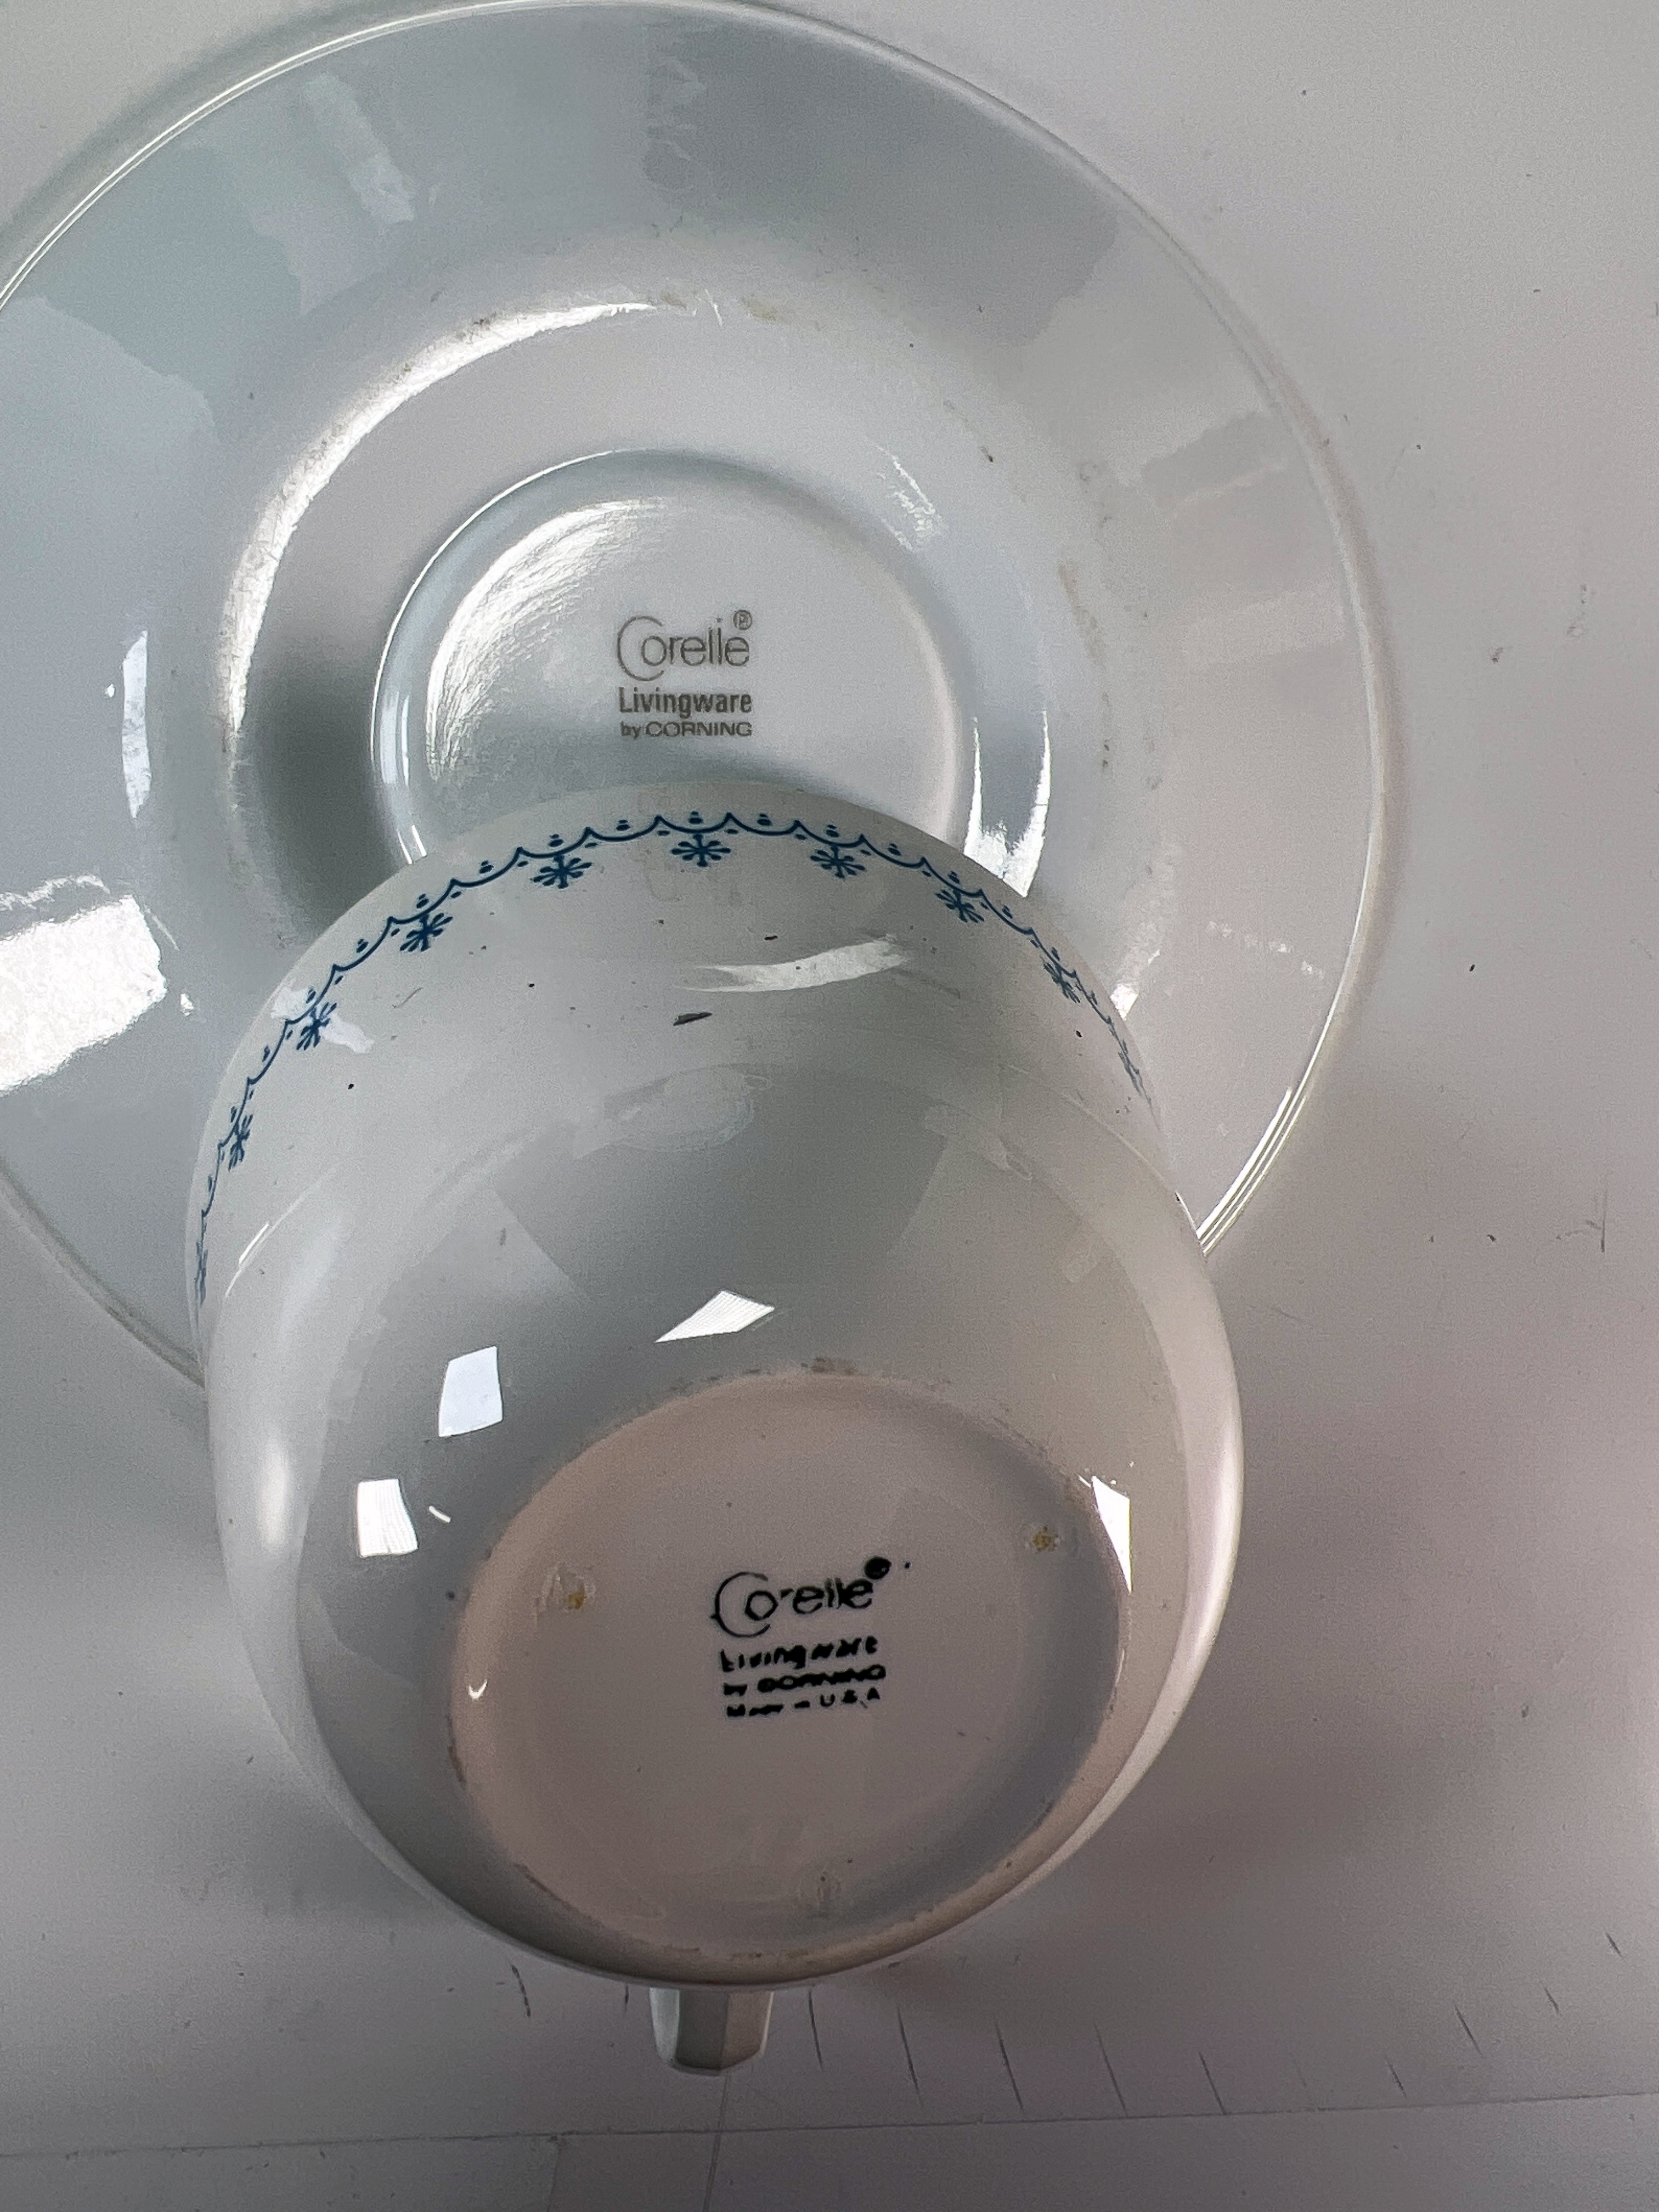 Corelle Cups & Saucers, Enamel Plates, Real Brand Cups image 3